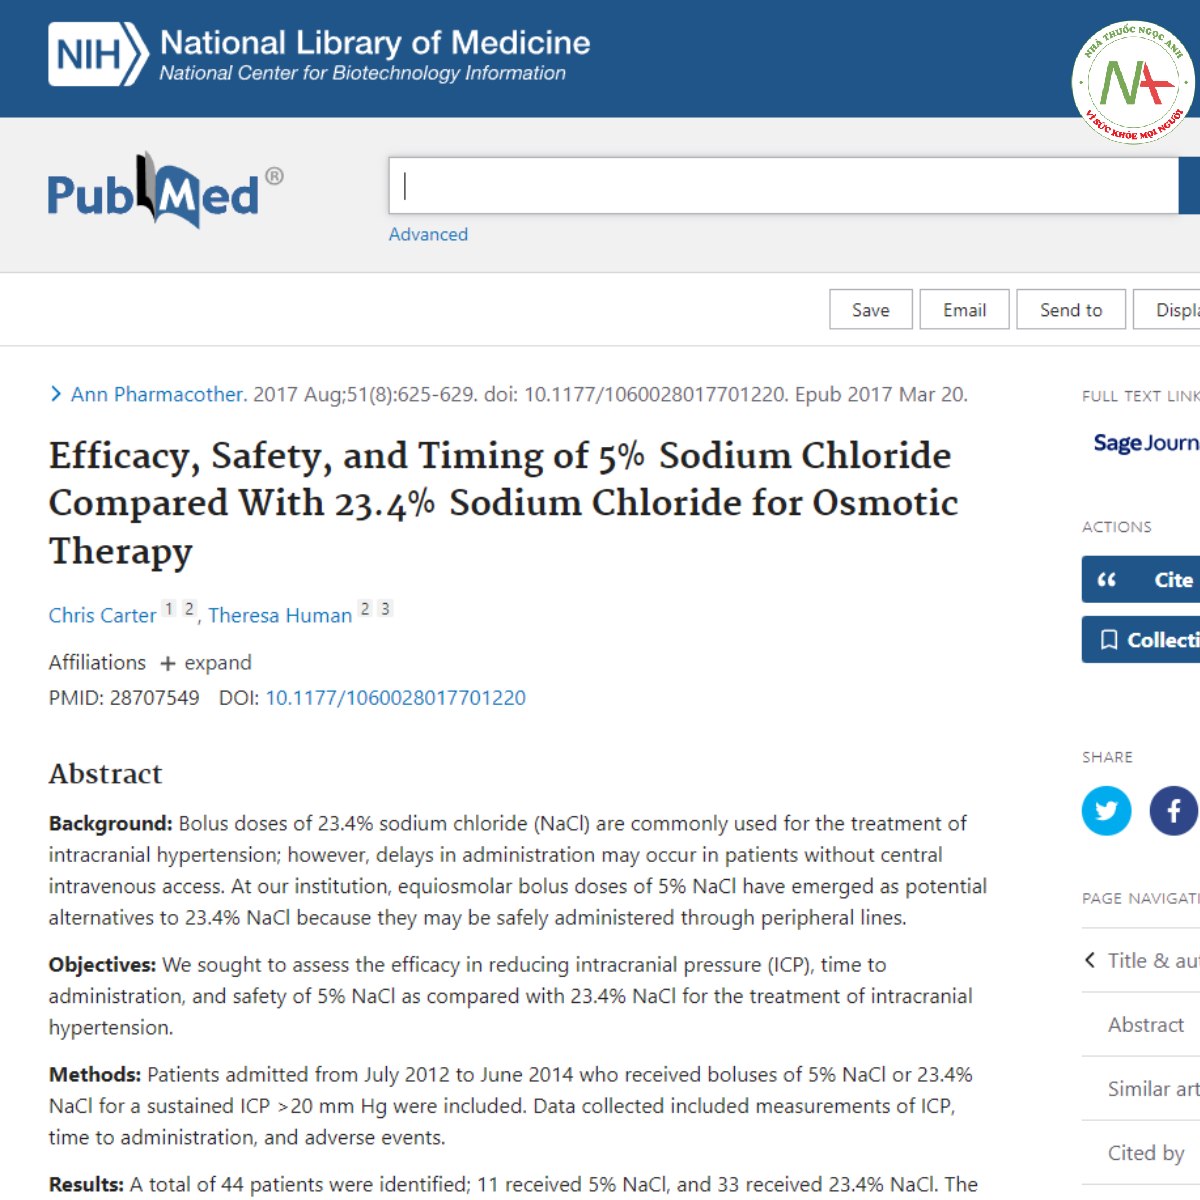 Efficacy, Safety, and Timing of 5% Sodium Chloride Compared With 23.4% Sodium Chloride for Osmotic Therapy